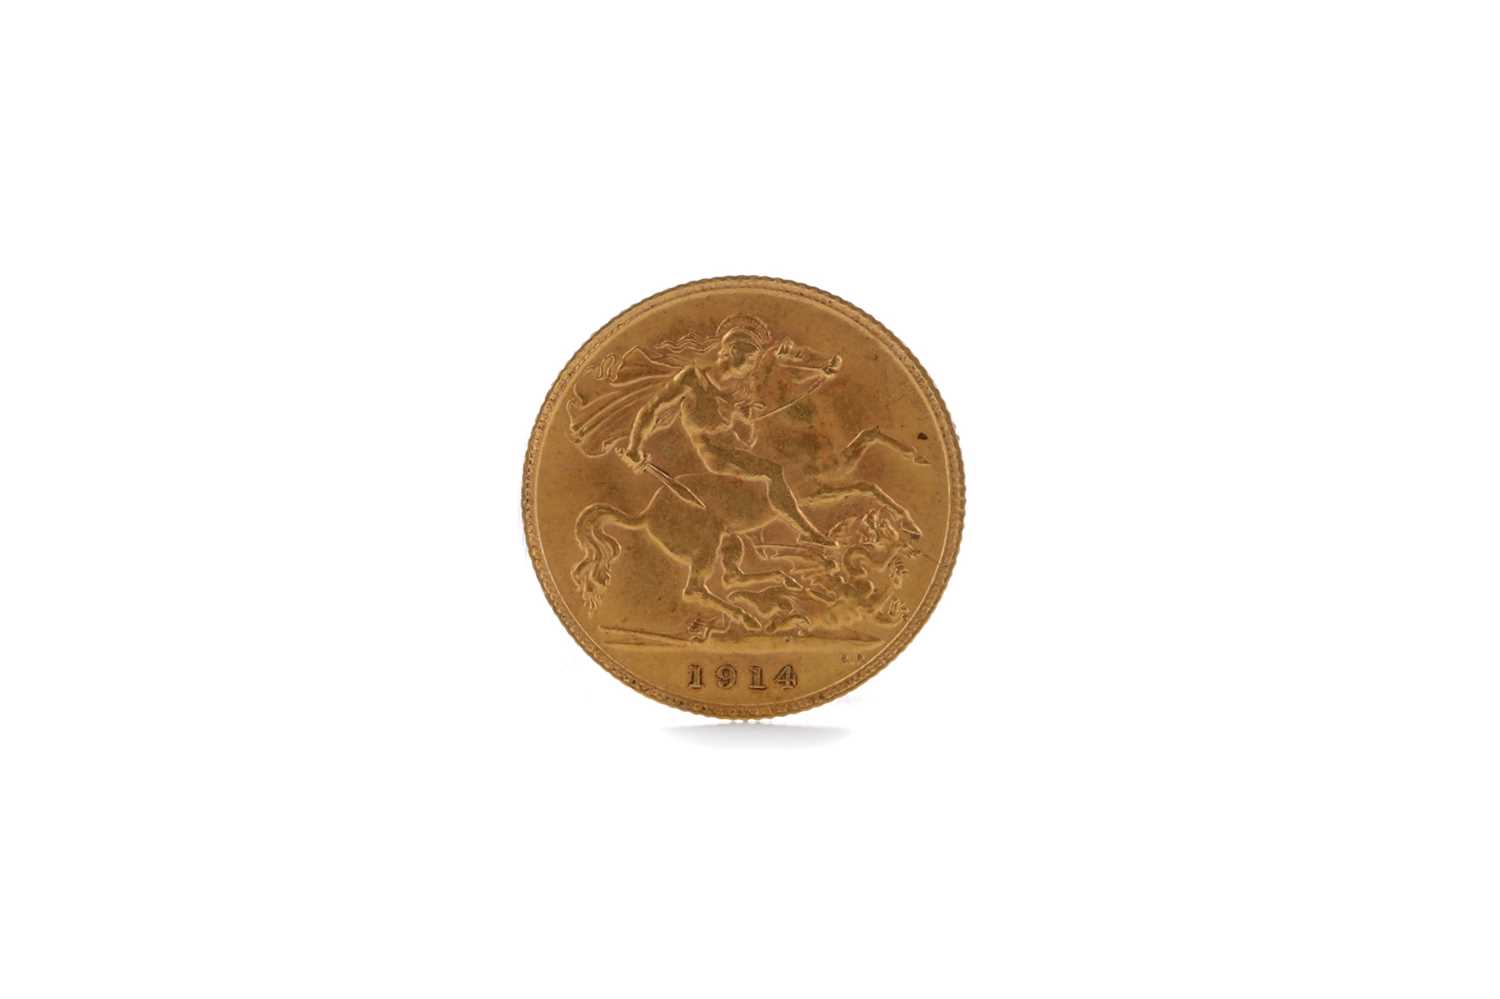 Lot 41 - A GOLD HALF SOVEREIGN DATED 1914